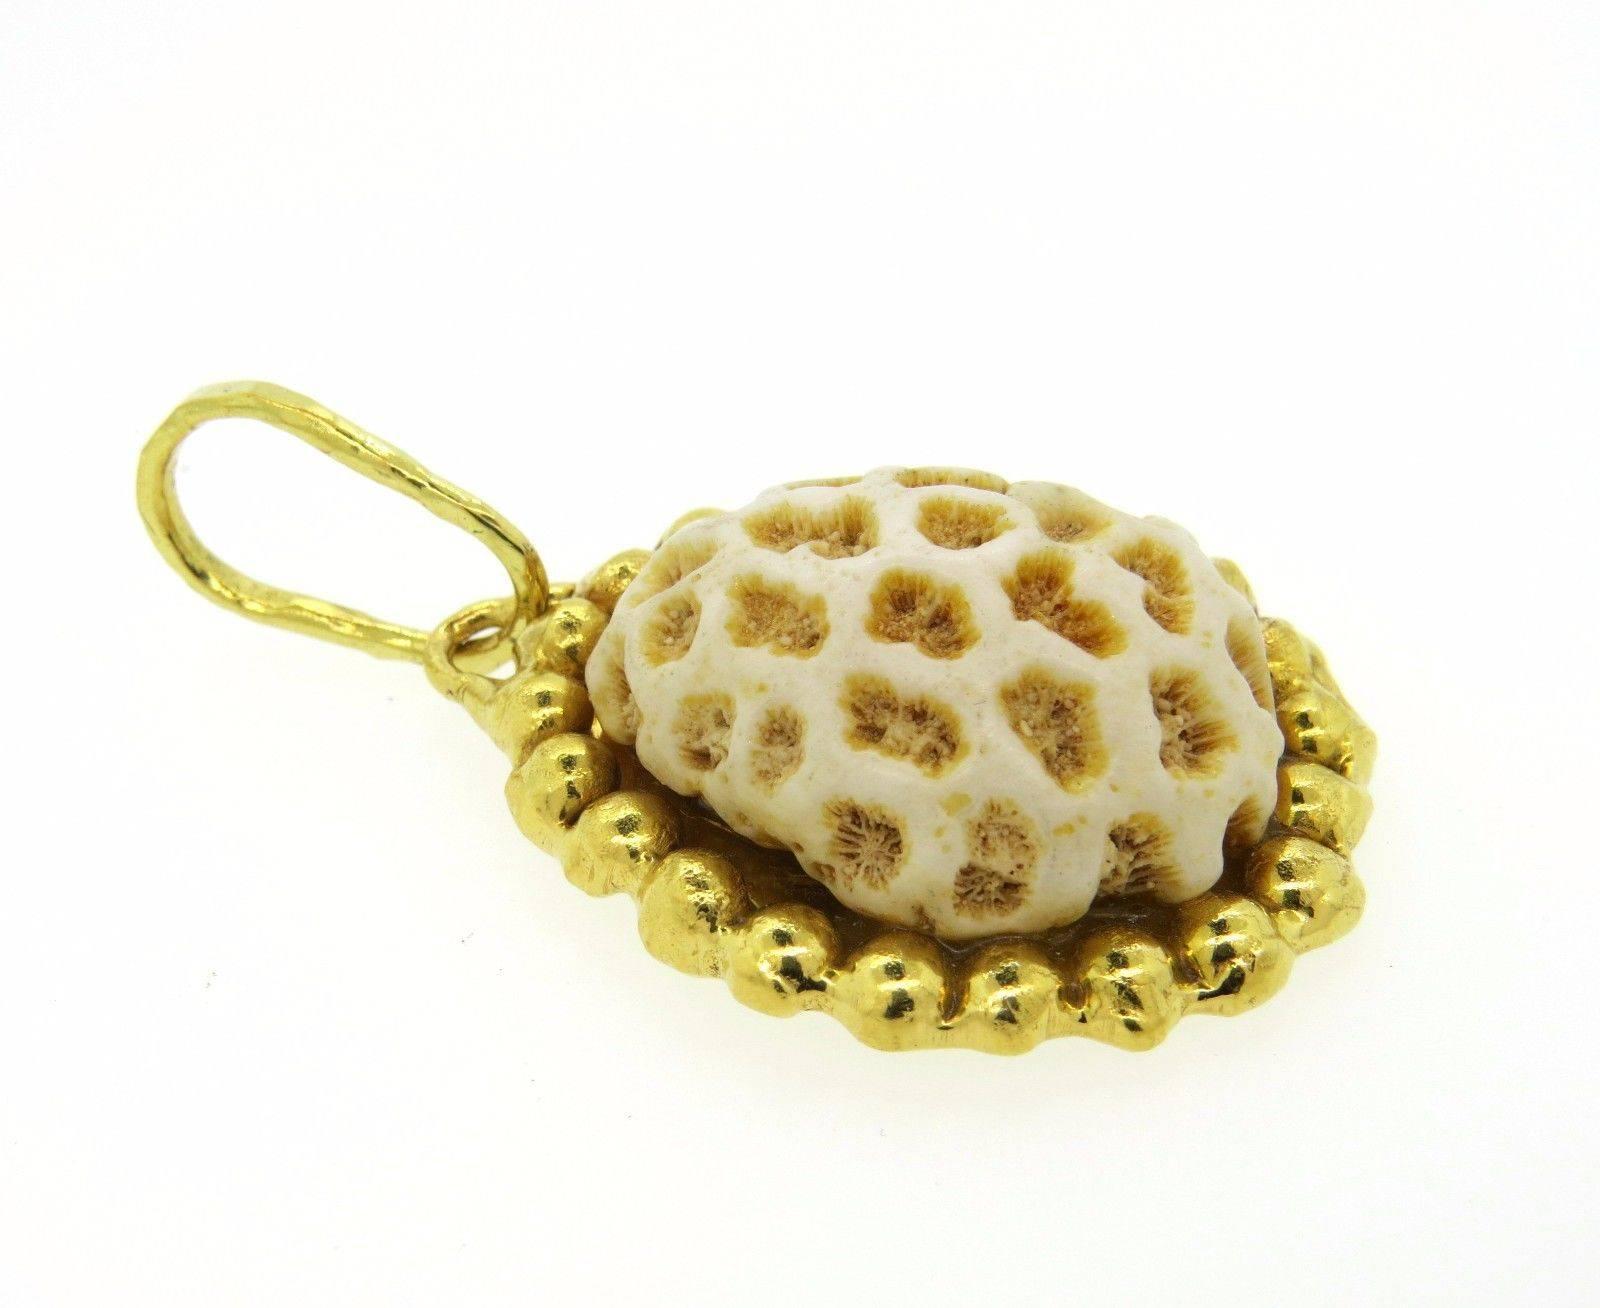 A 22k yellow gold pendant set with white coral. The pendant measures 67mm long (including bale) x 36mm at widest point.  The weight of the pendant is 40.7 grams.  Marked: Jean Mahie, 22K.